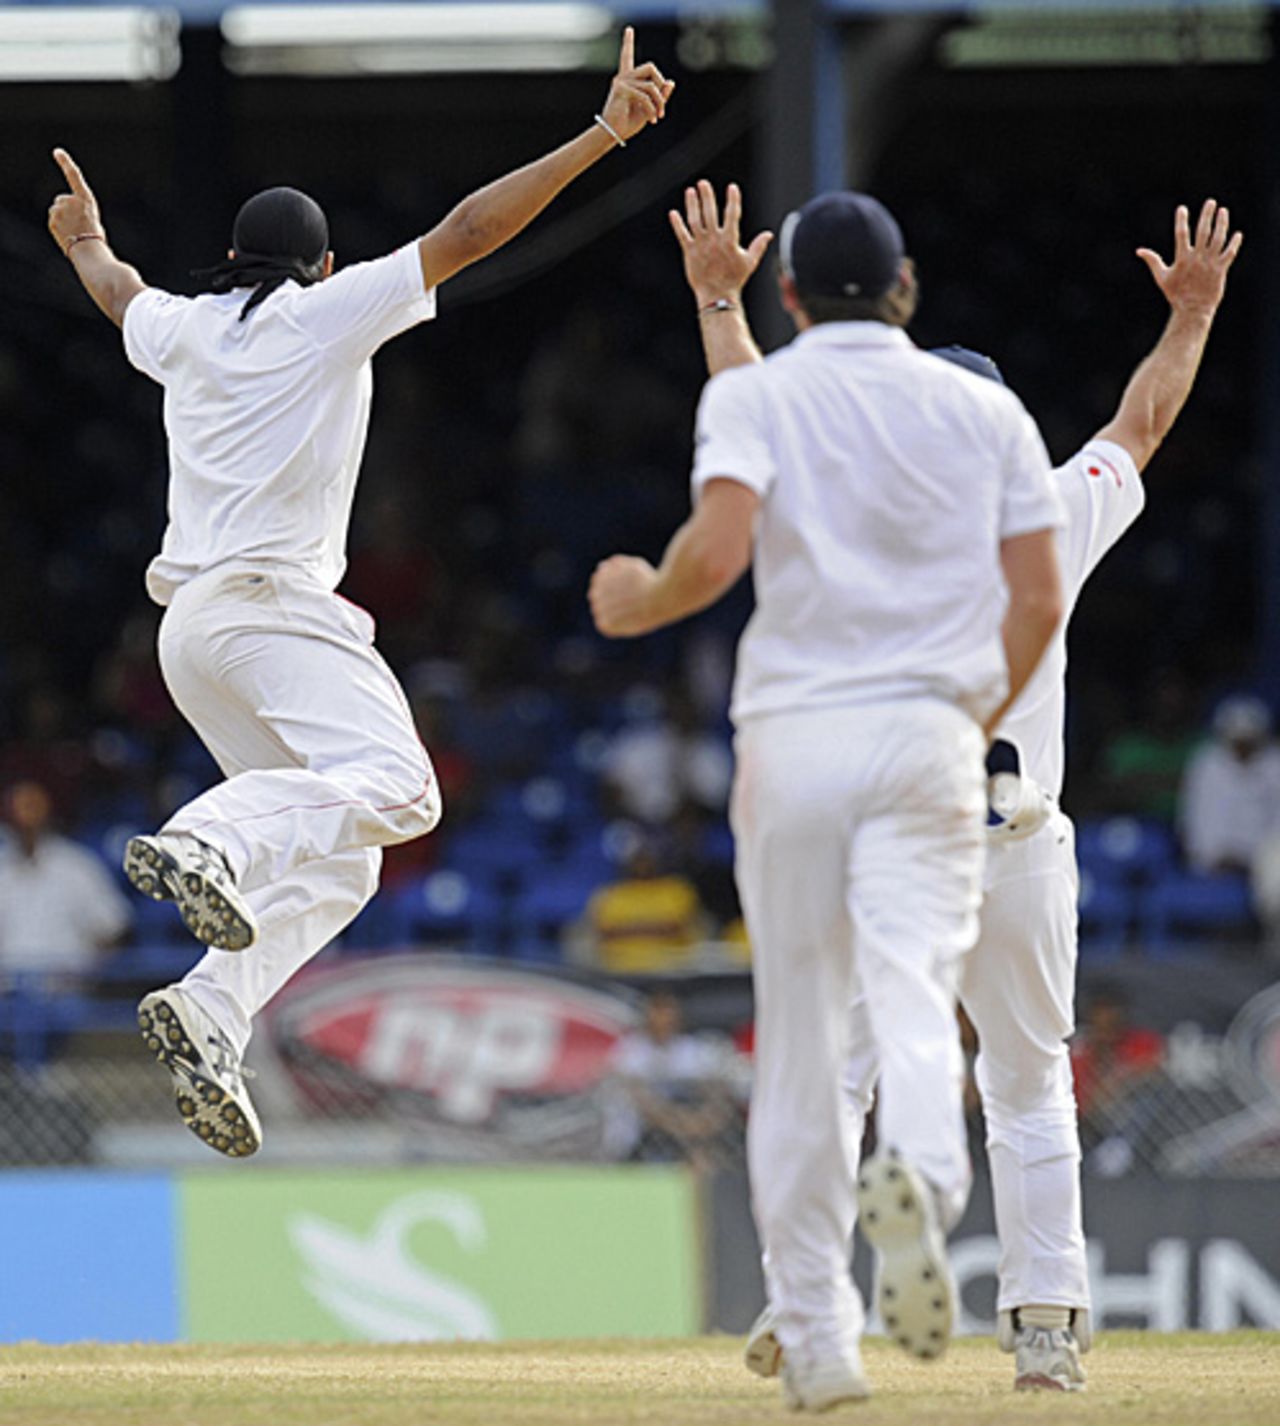 Monty Panesar leaps up to appeal for, and celebrate, the wicket of Ryan Hinds, West Indies v England, 5th Test, Trinidad, March 10, 2009